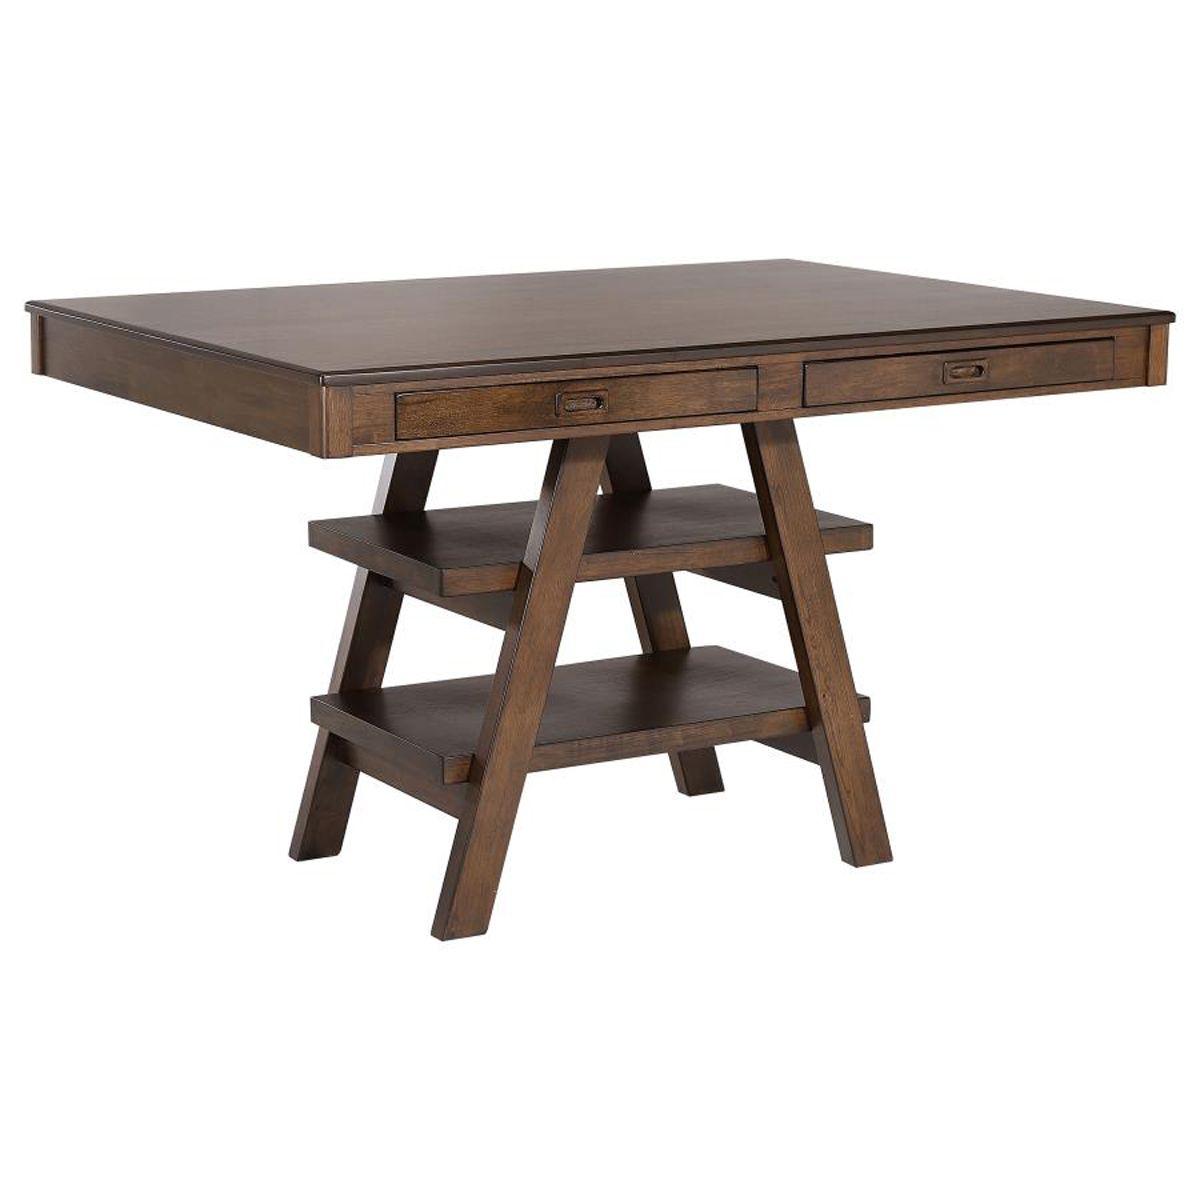 Picture of LEWIS COUNTER HEIGHT TABLE